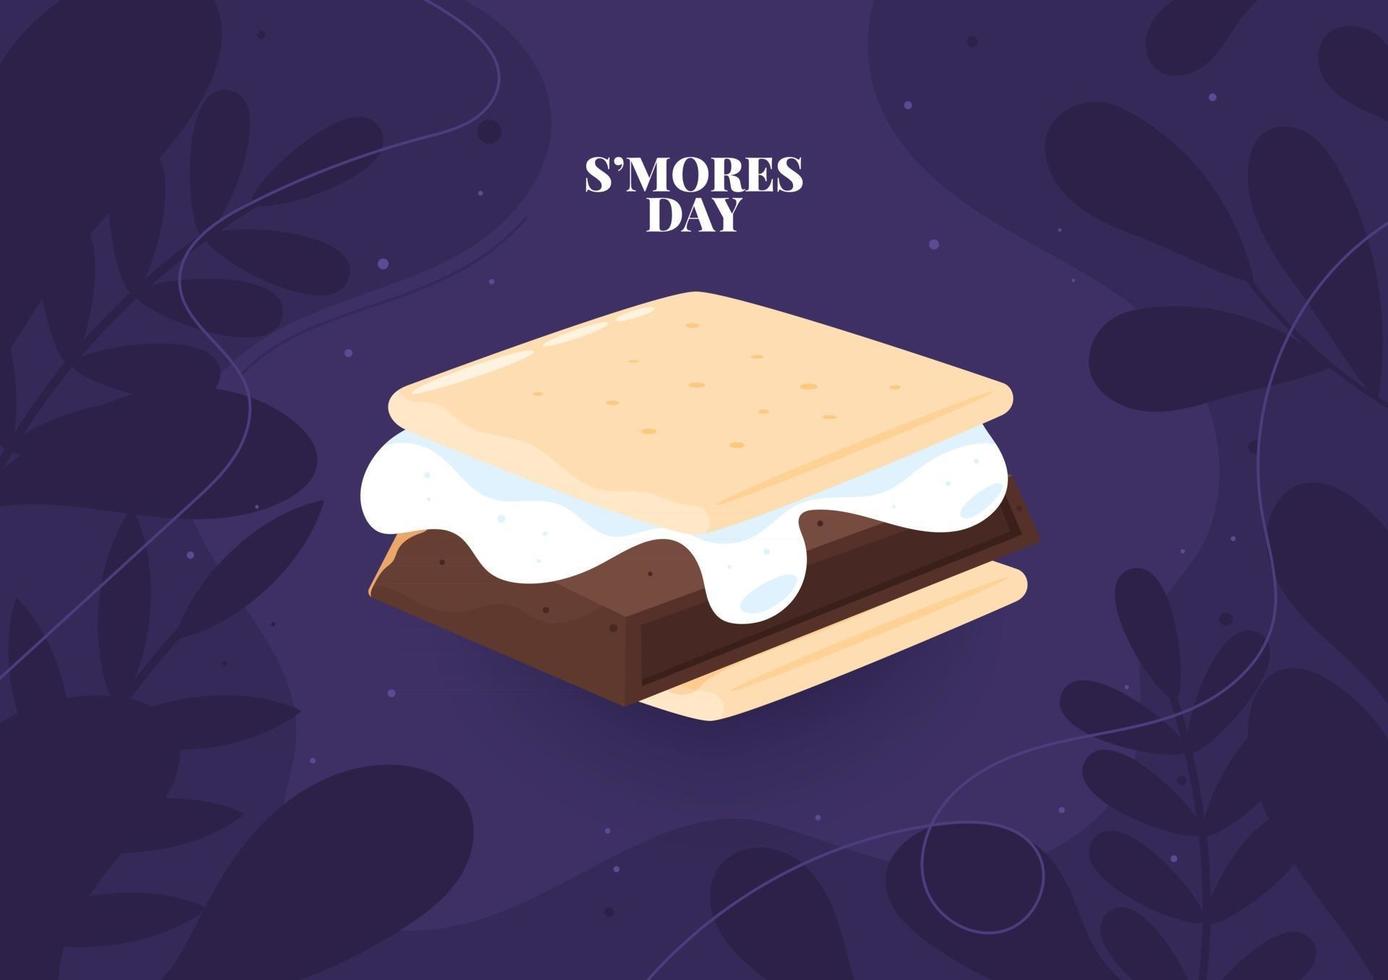 National S'mores Day. Cracker, Chocolate, Marshmallow illustration vector